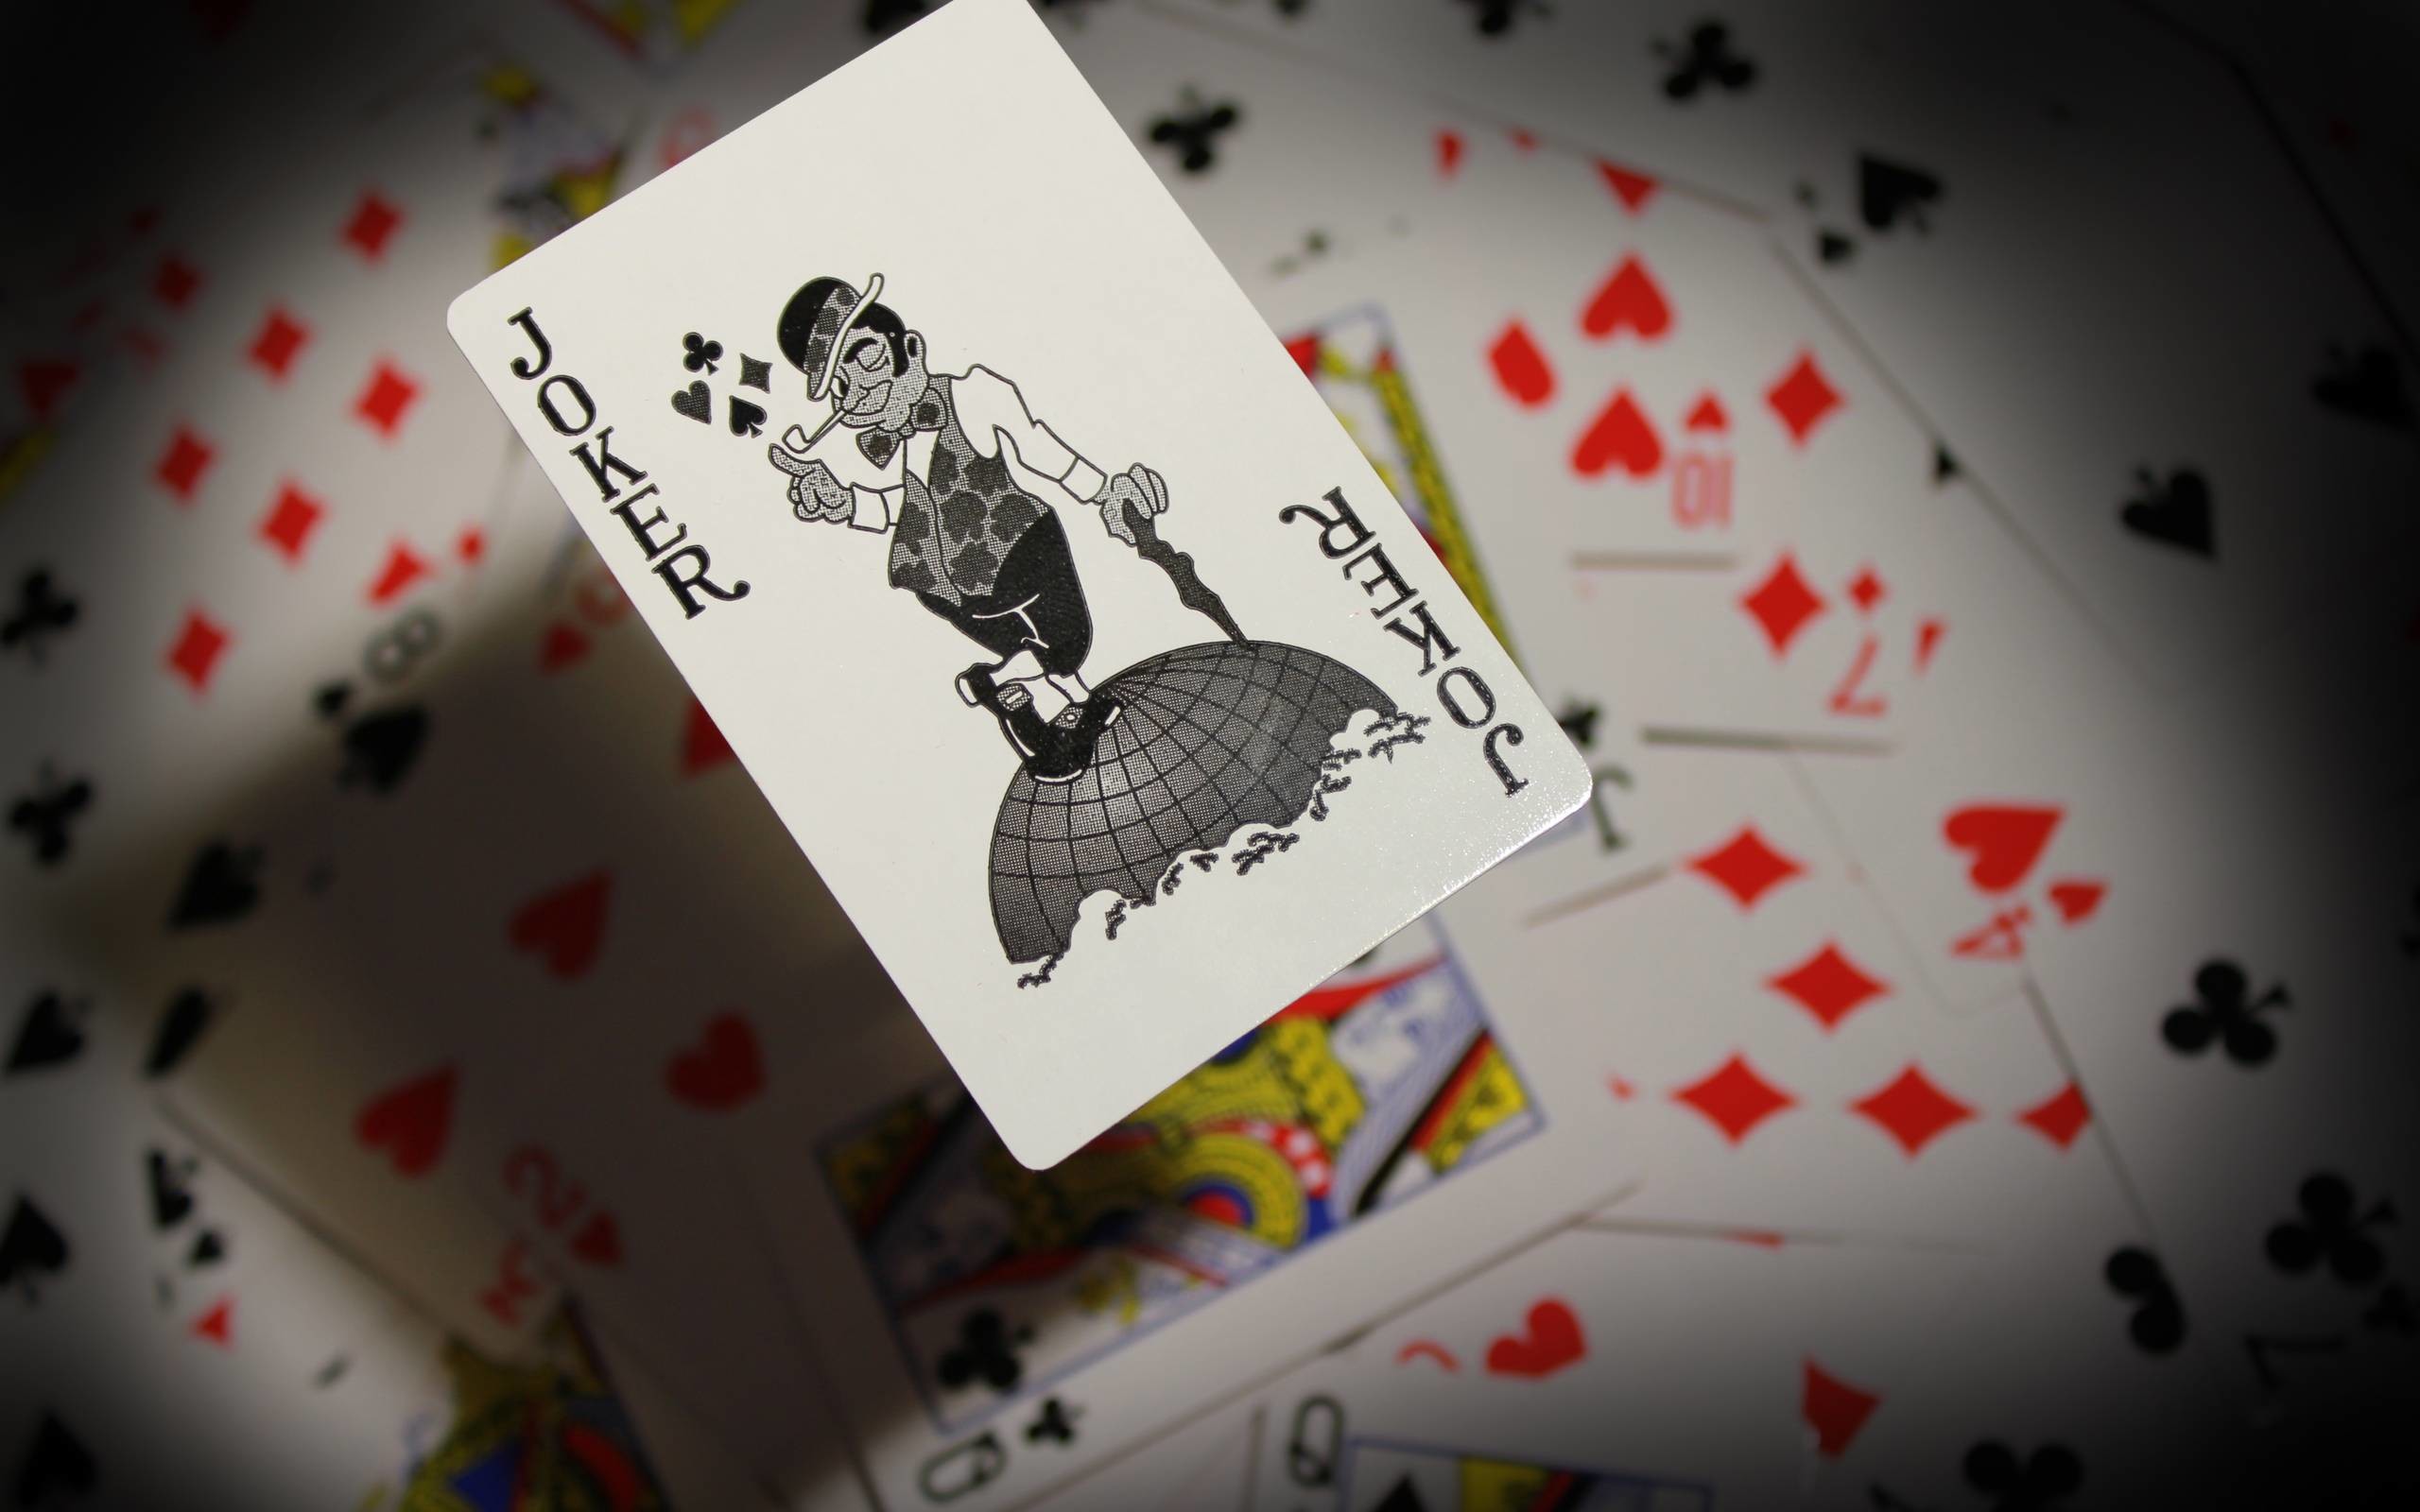 playing card wallpaper hd,illustration,games,font,drawing,graphic design